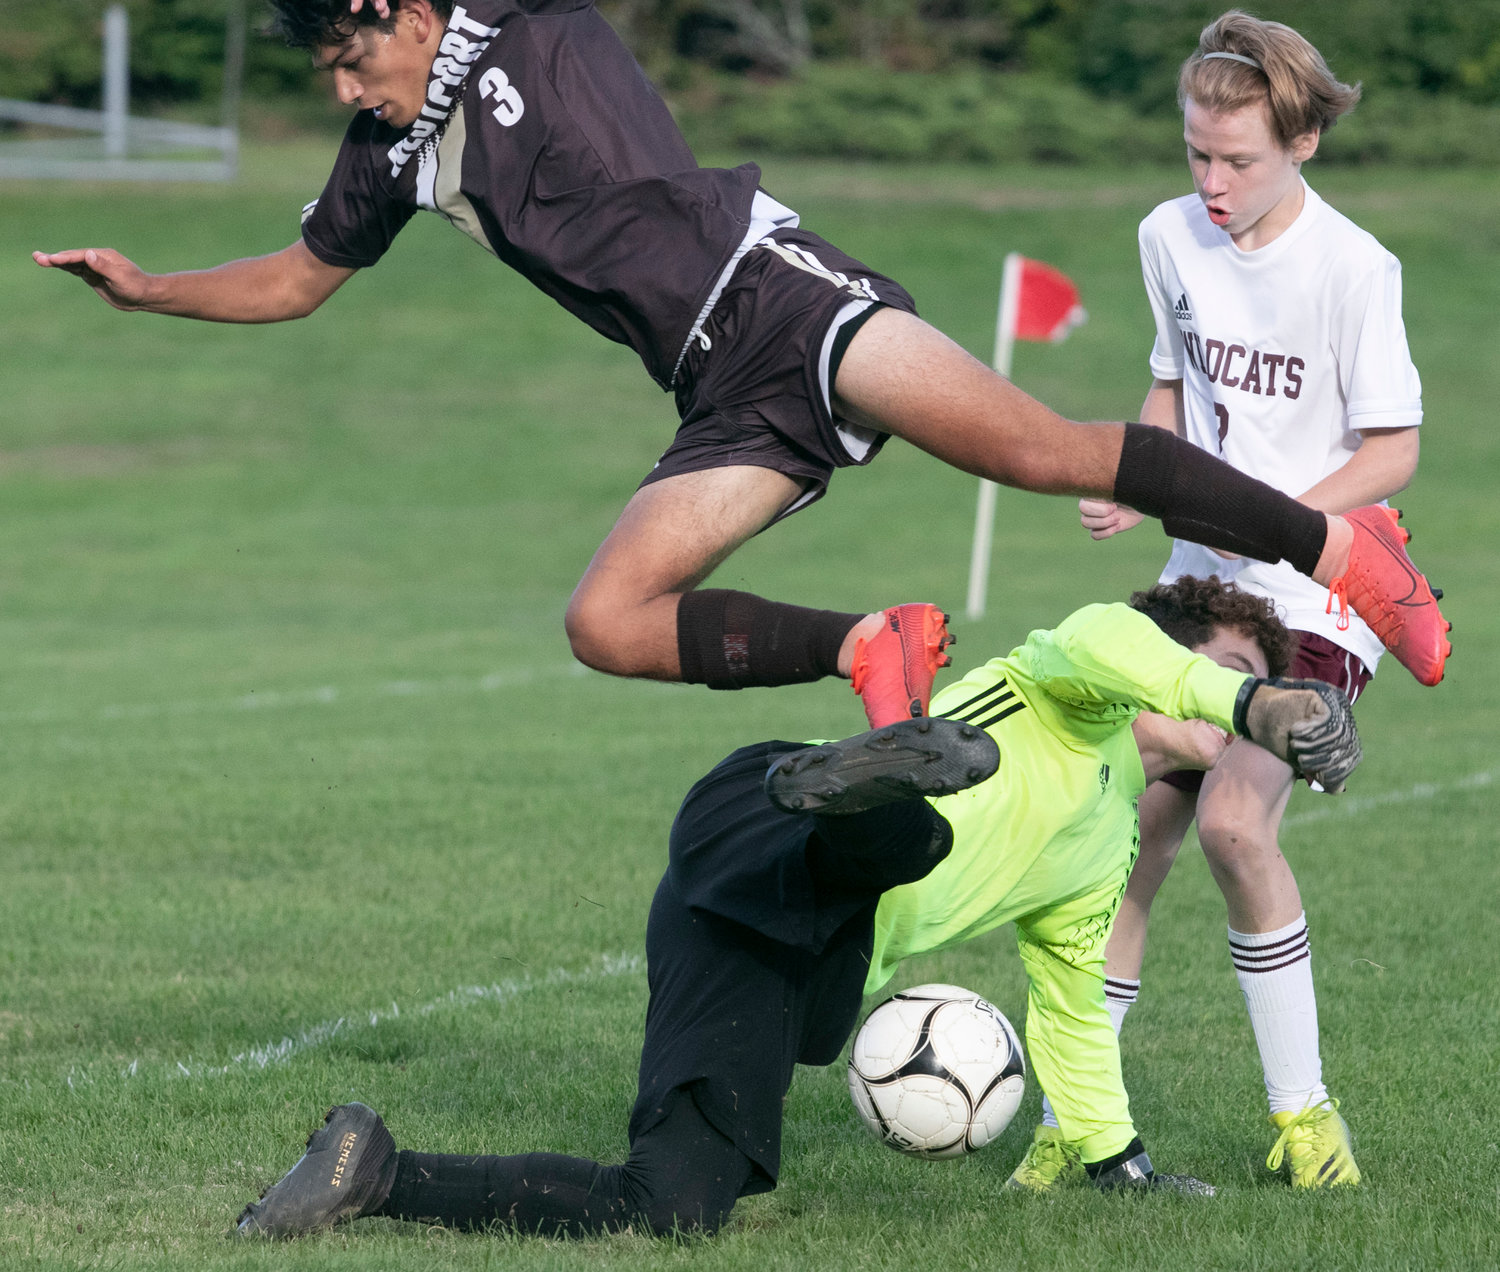 Midfielder, Antonio Dutra-Africano is upended by the West Bridgewater goalkeeper as he attempts to score in the second half.